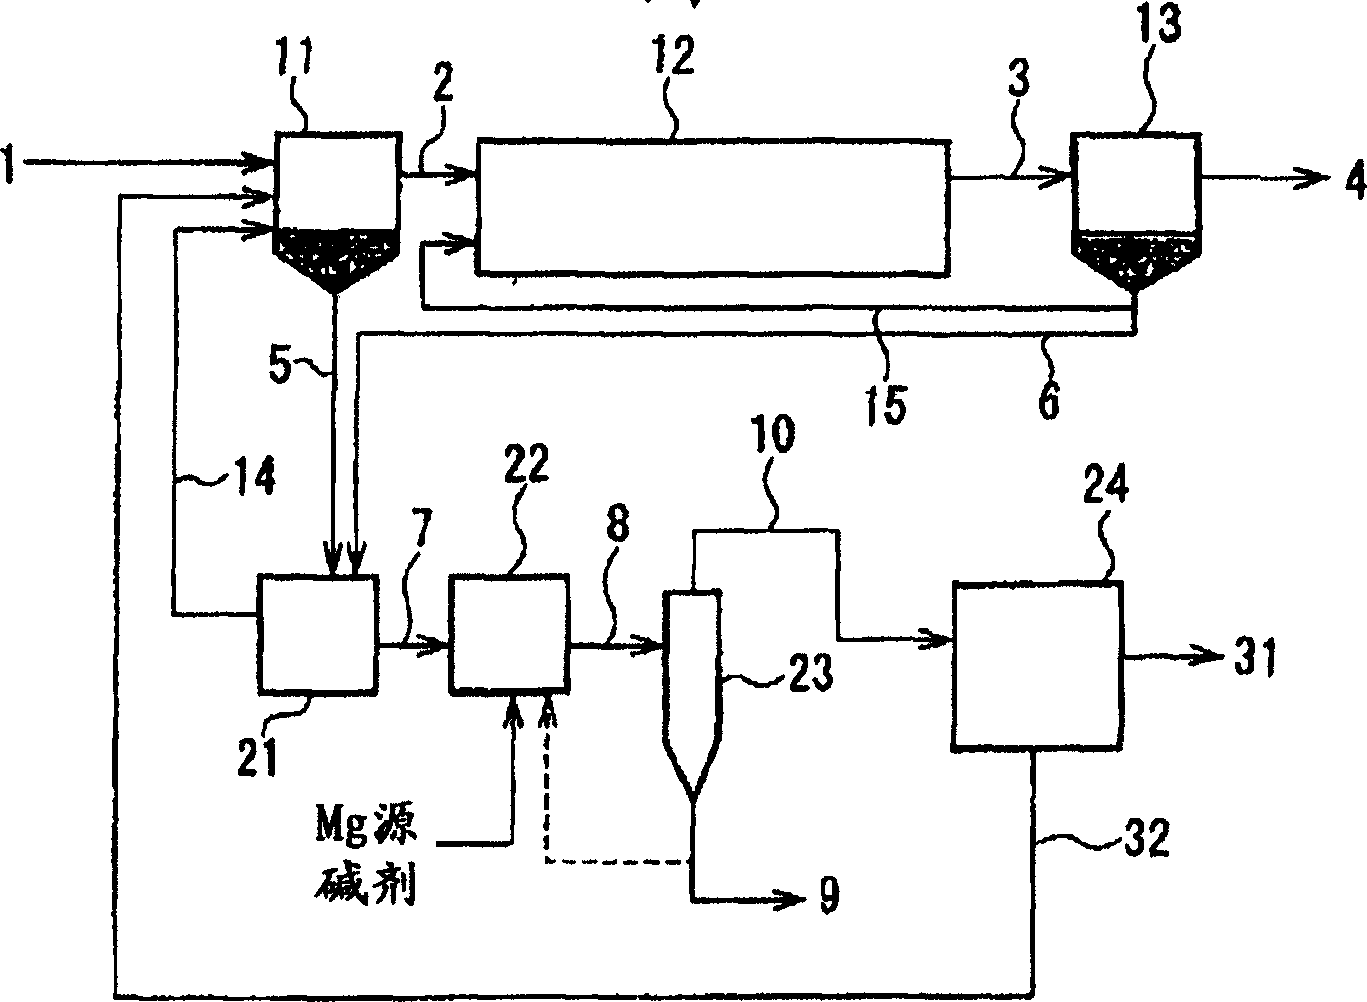 Method of formation/recovery of magnesium ammonium phosphate and apparatus therefor